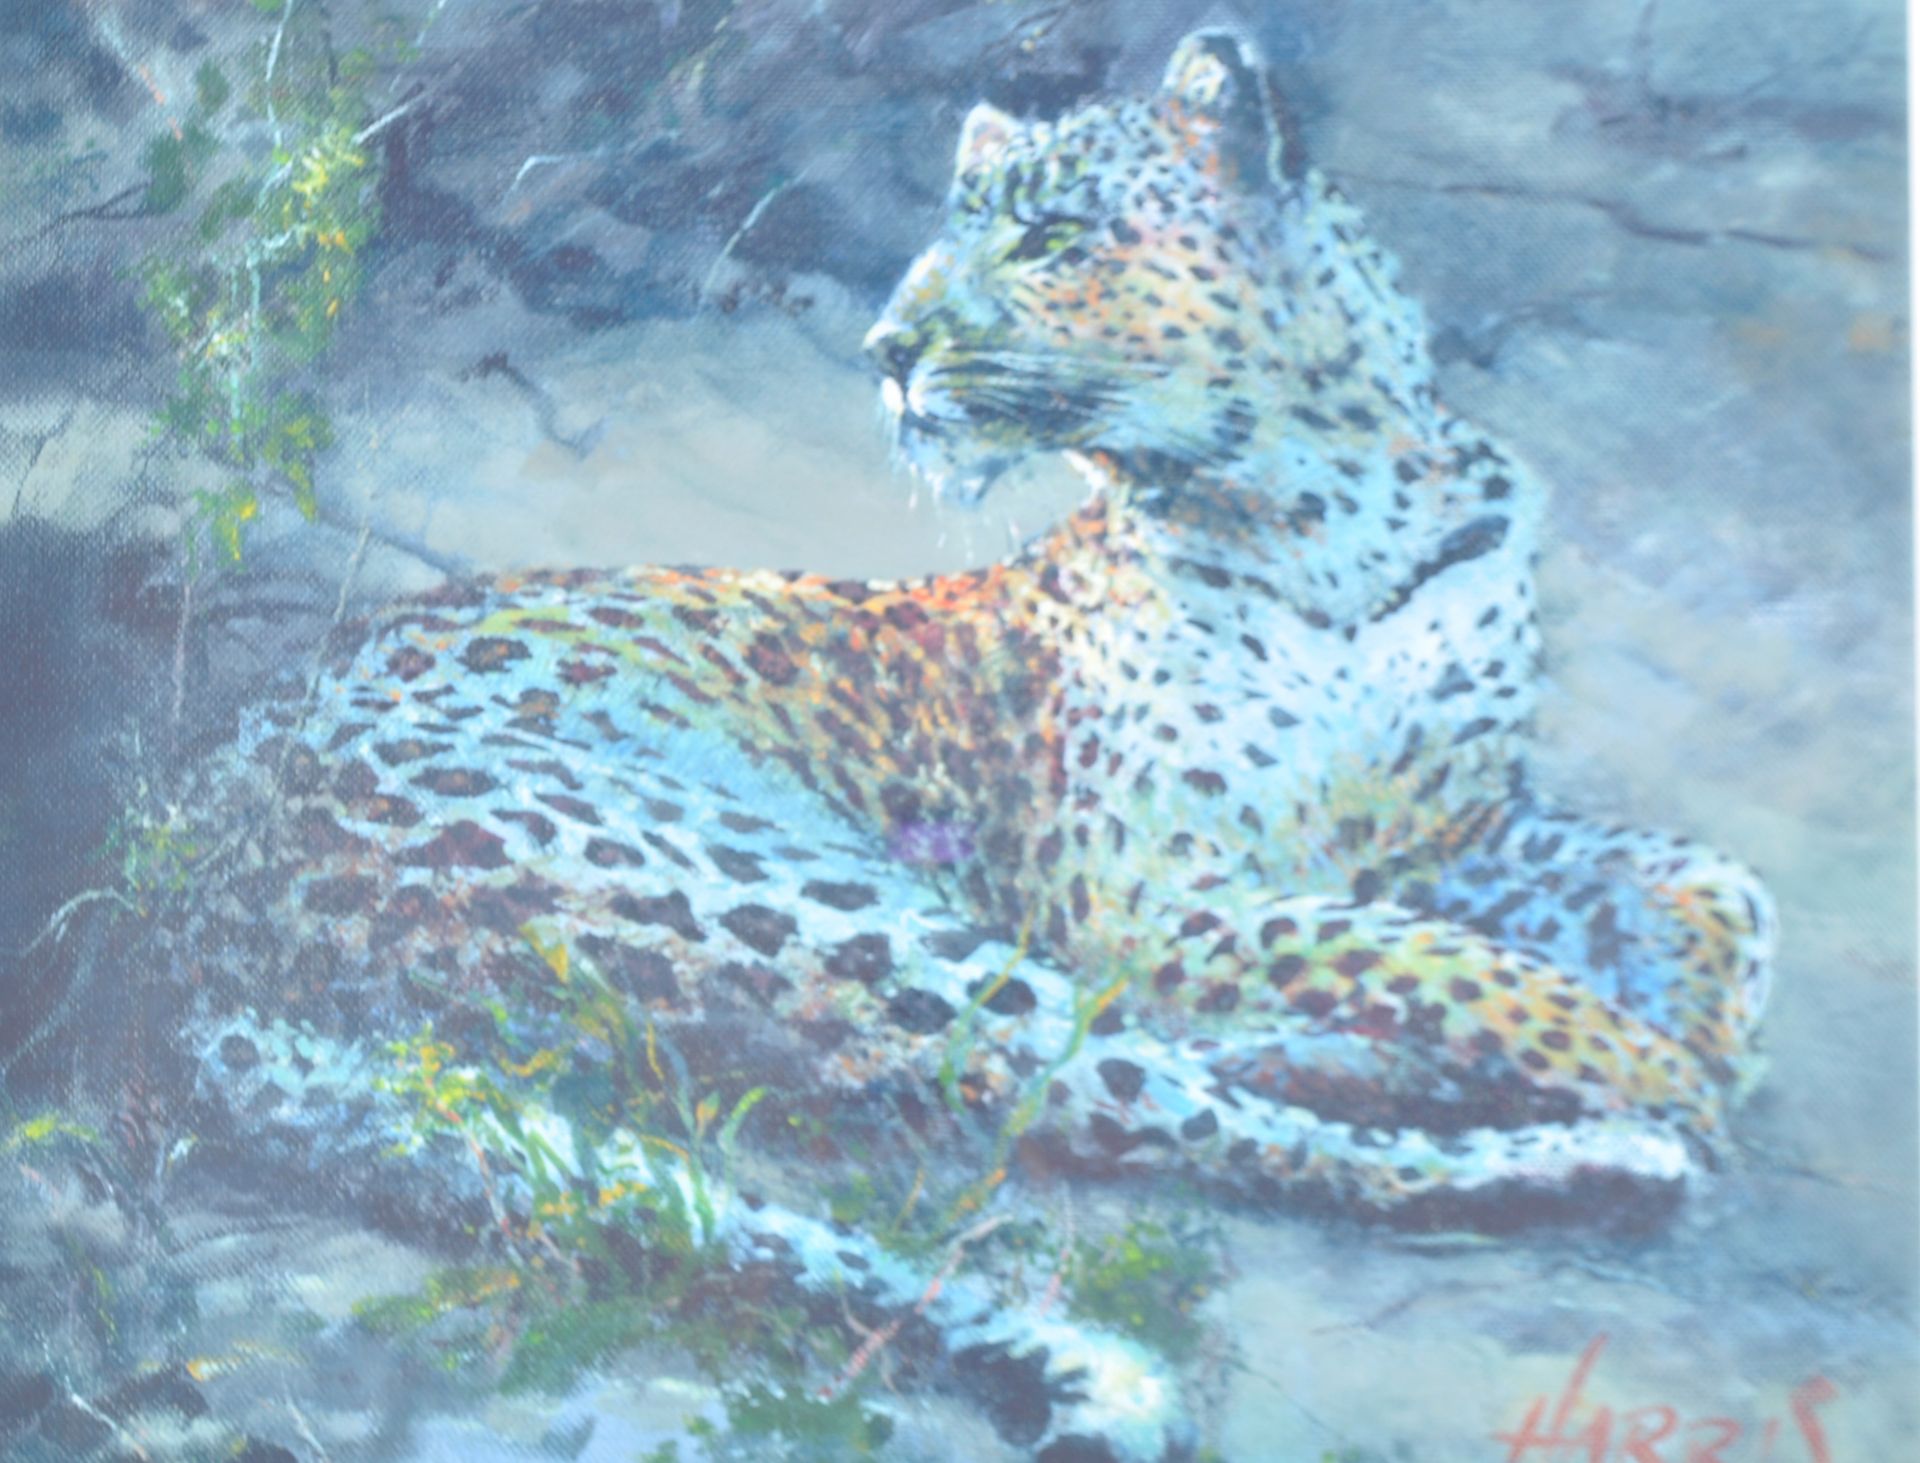 ROLF HARRIS - LEOPARD RECLINING AT DUSK - SIGNED PRINT - Image 2 of 10